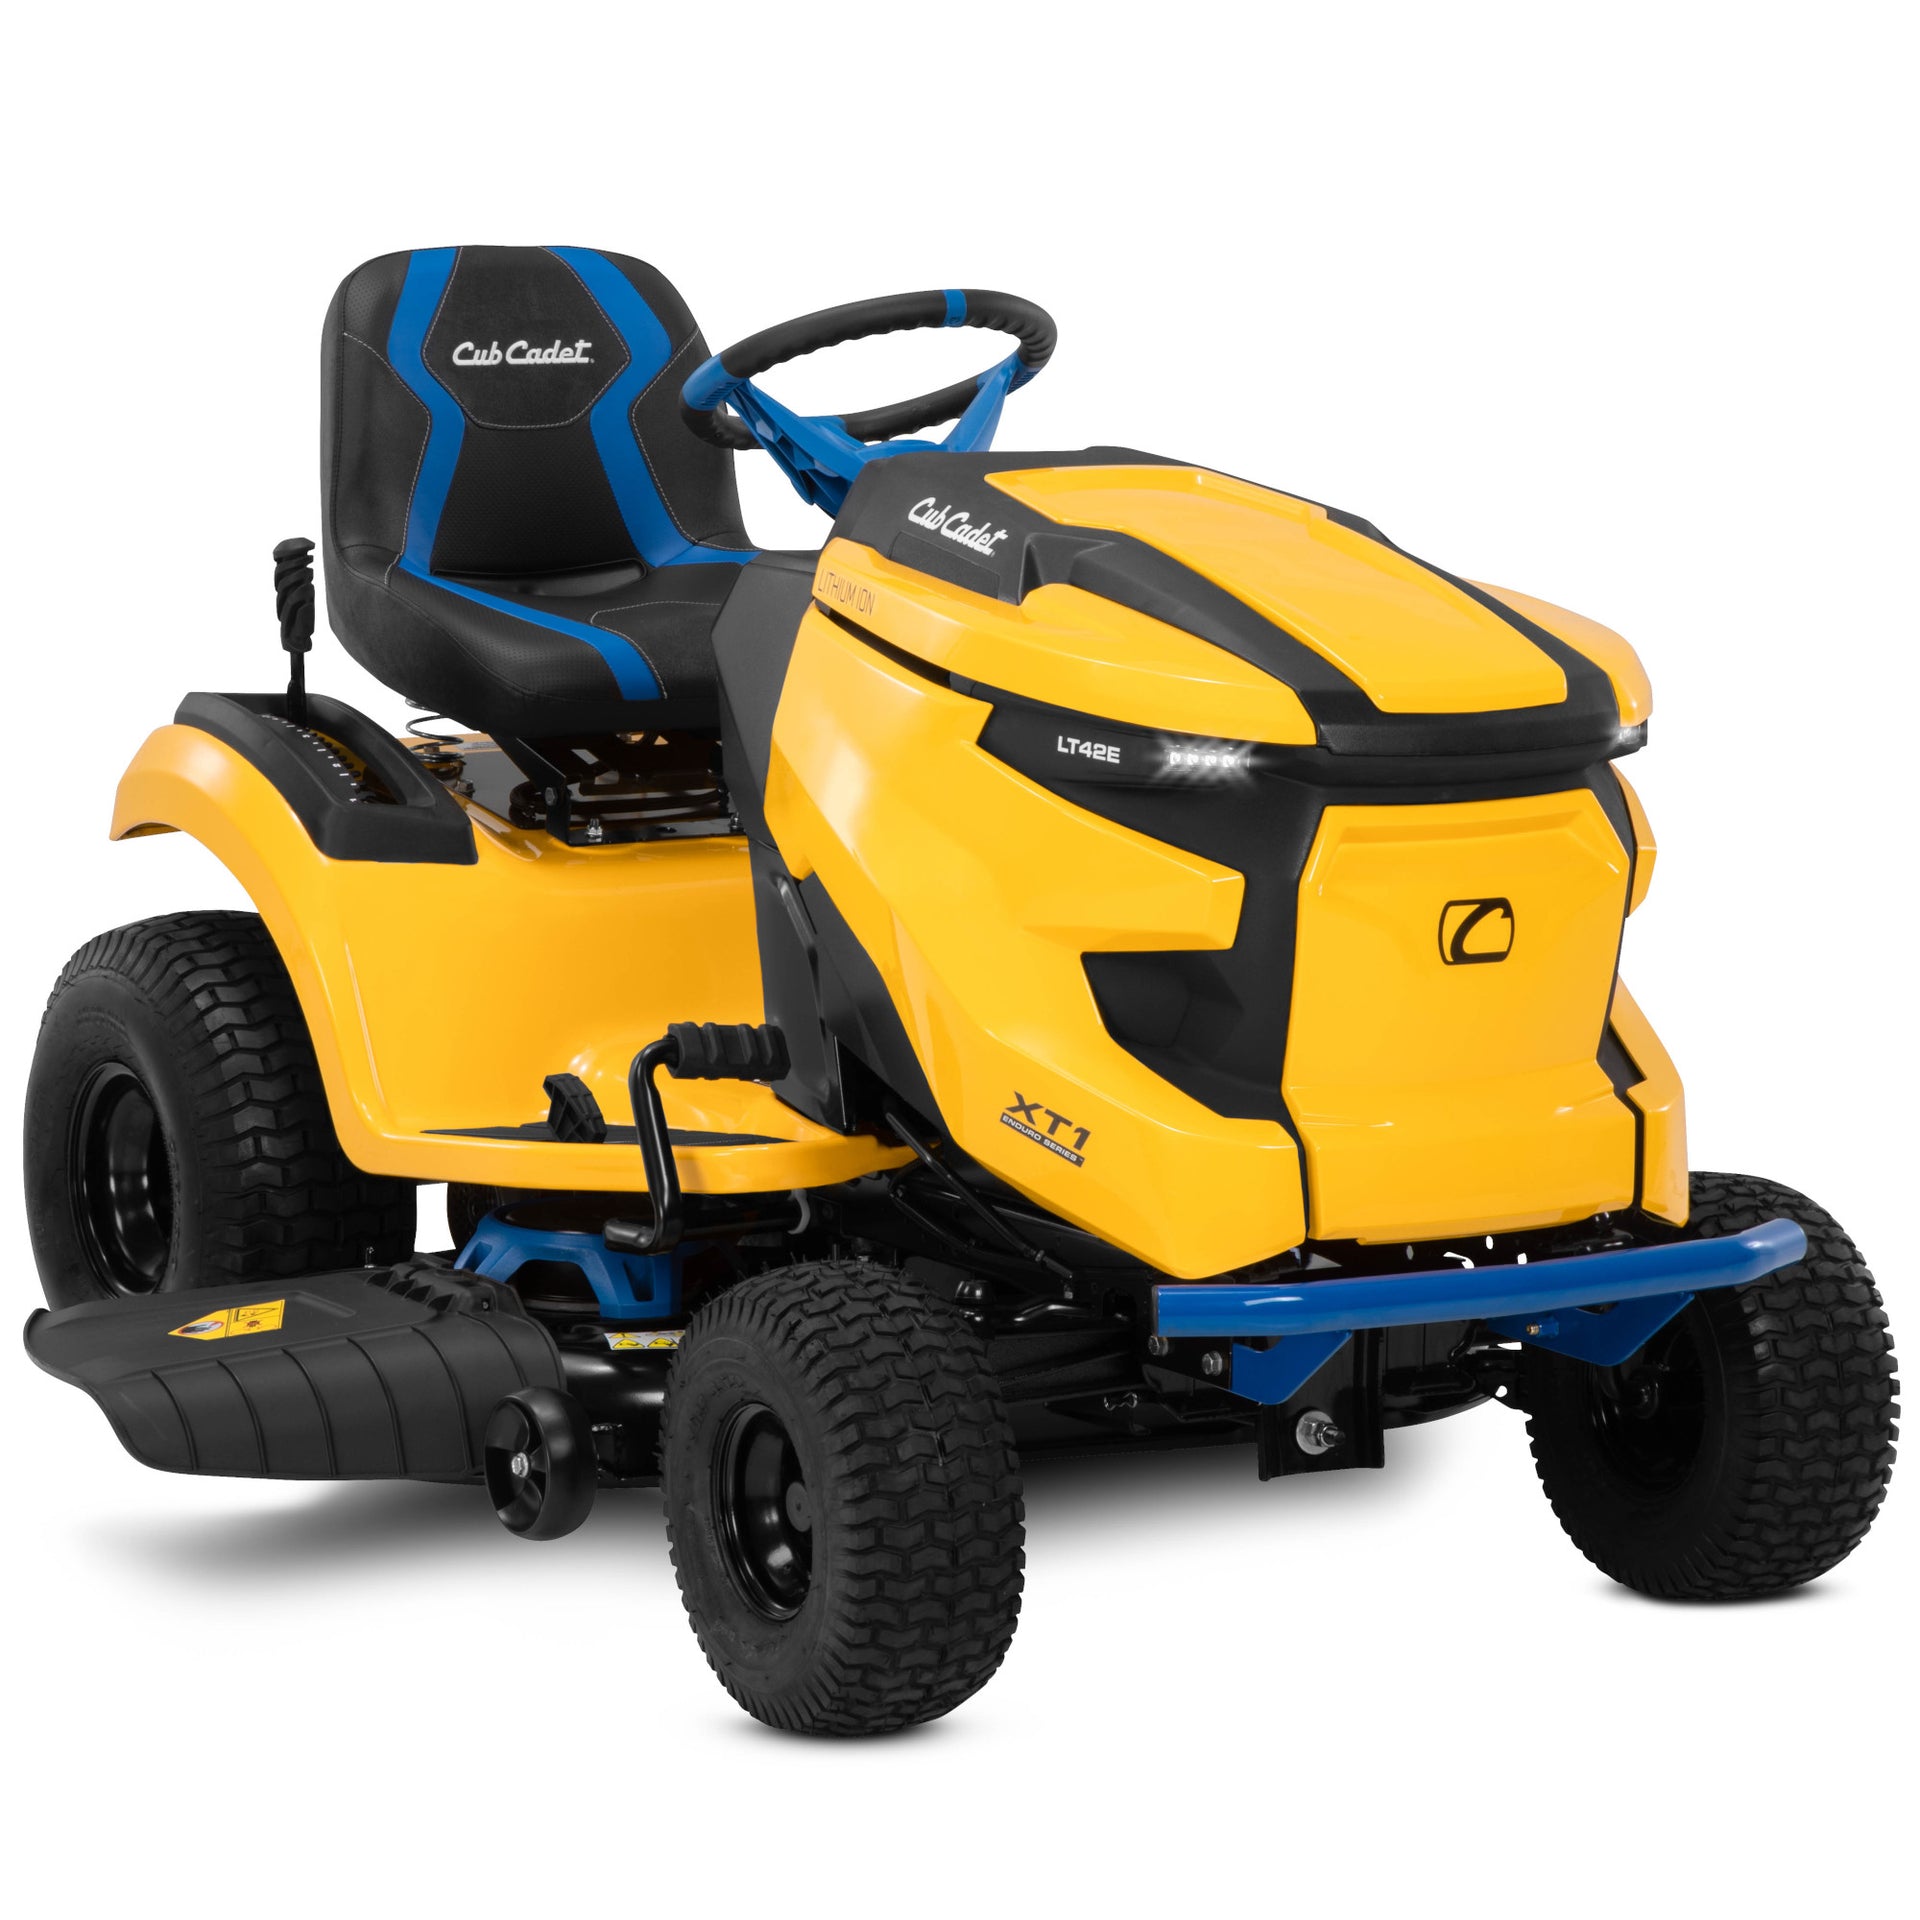 The advanced Cub Cadet 56 Volt MAX,60Ah 3000Wh Lithium Ion battery powered XT1 LT 42 E. The future of ride on mowers. Easily charges in a standard outlet. Mow up to two acres or 1.5 hours on a single charge without power fade. Recharge approx. 4 hours-No hassle, no fuss. To test drive contact Mower City Albury. 123